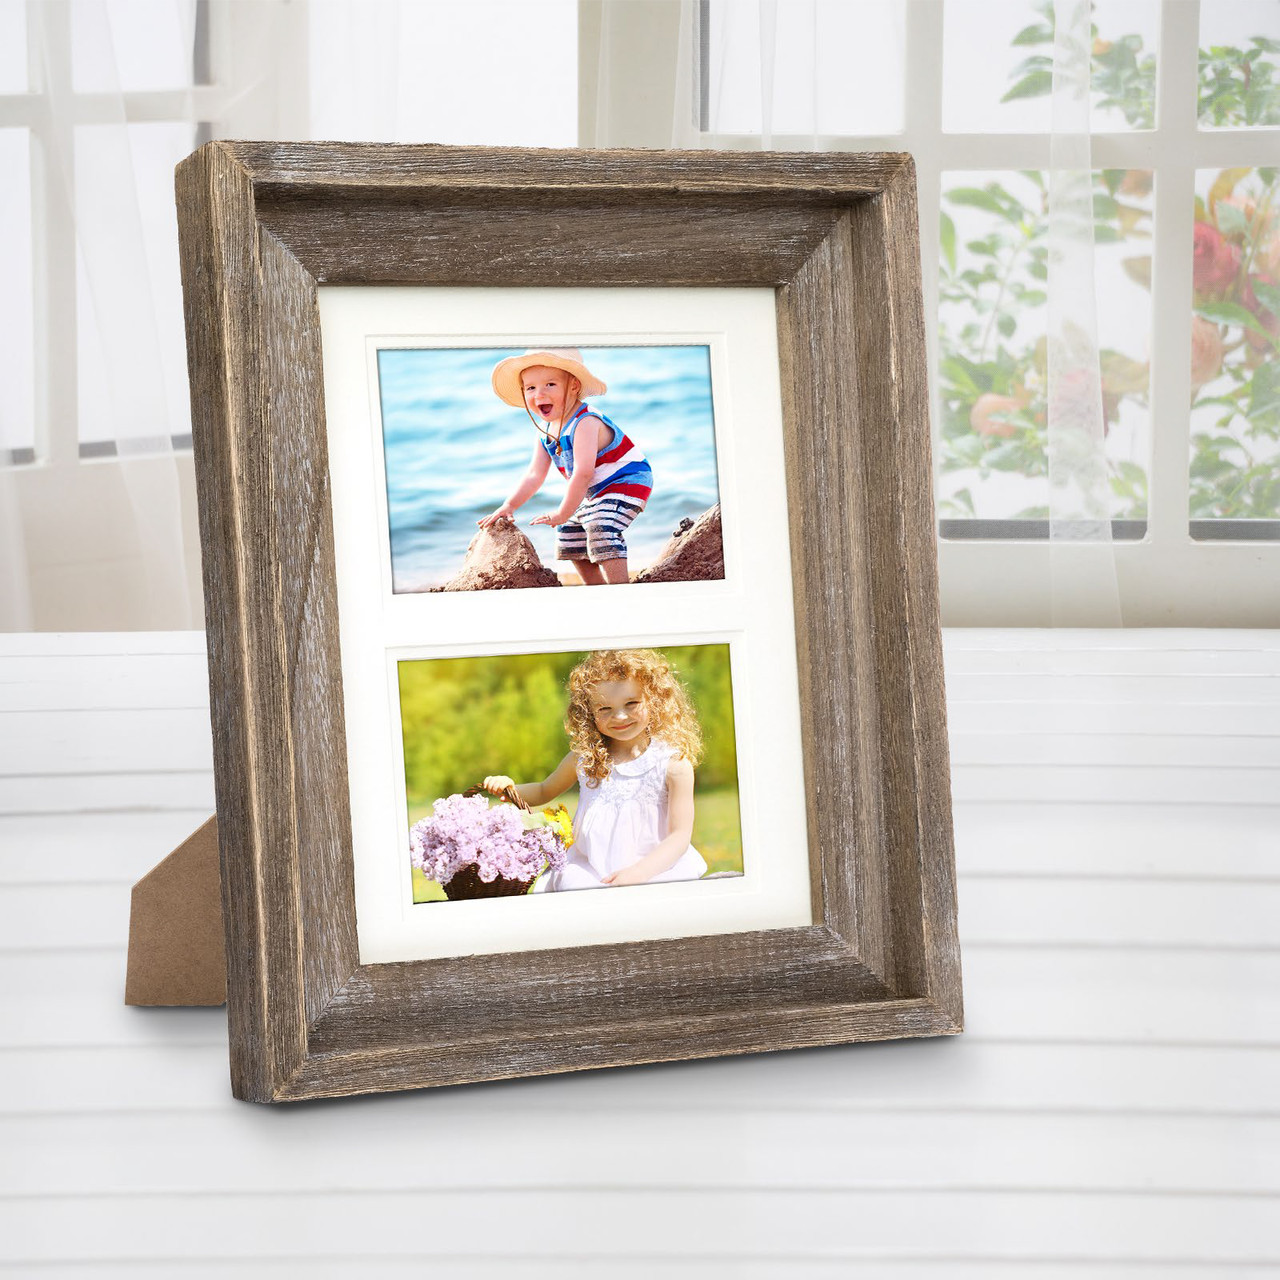 Rustic Barnwood 8x10 Picture Frame Set: 8x10 or 5x7 or 4x6 with included  Matte - Excello Global Brands